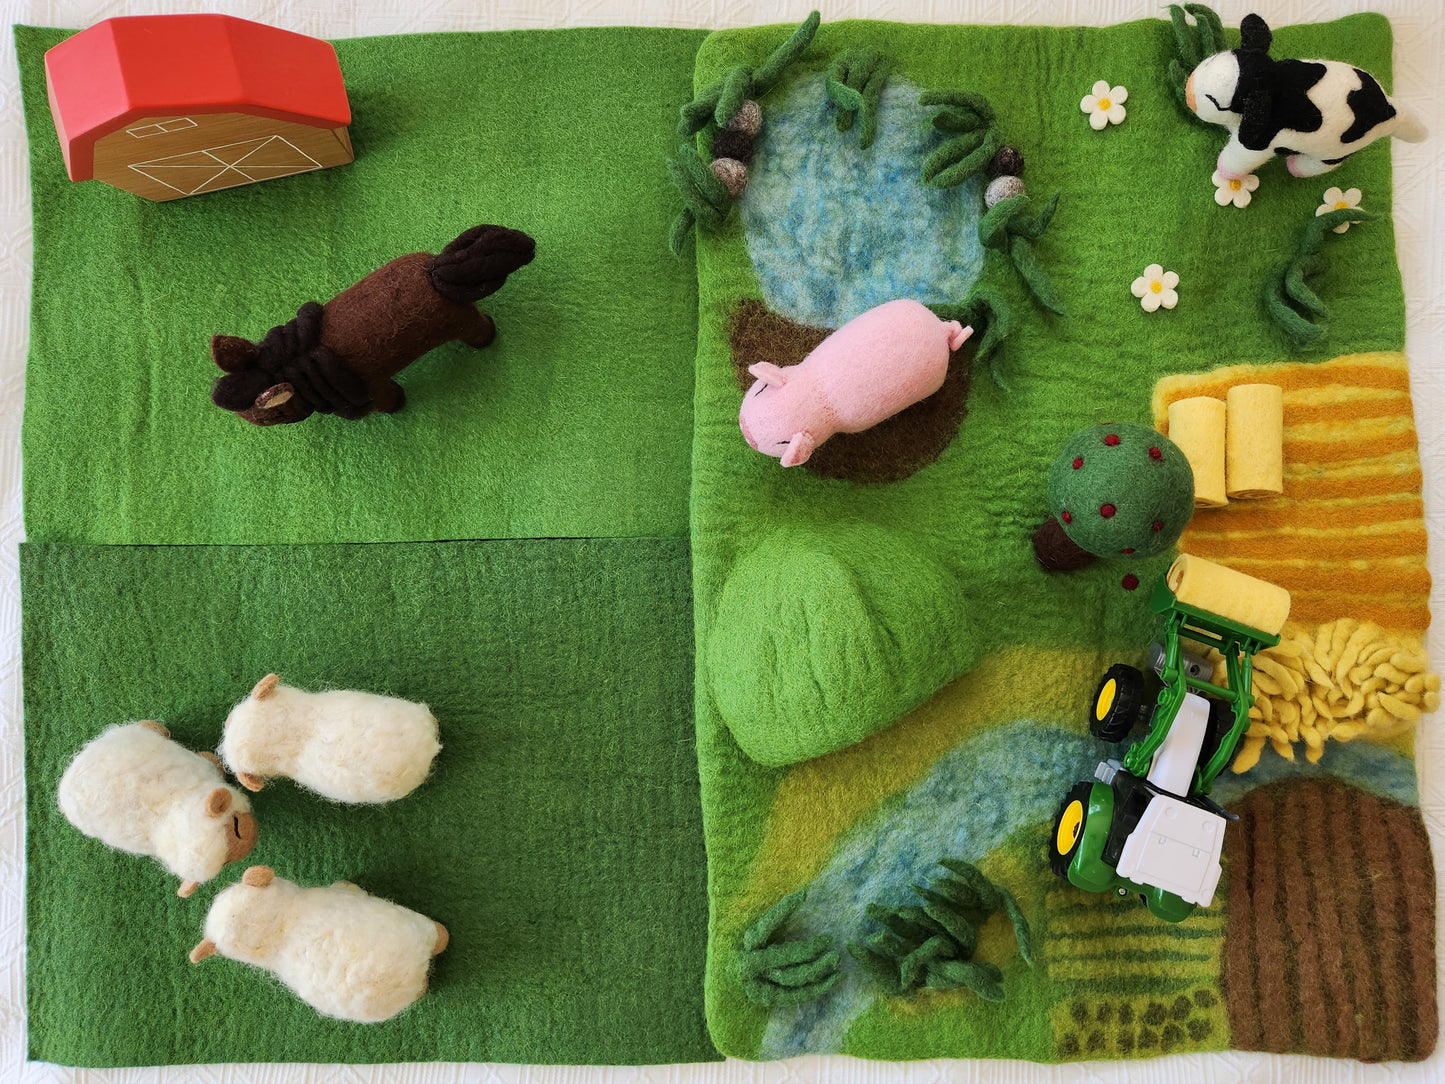 Happy Hooves - Felt Farmyard Play Mat top view with felt animals and accessories